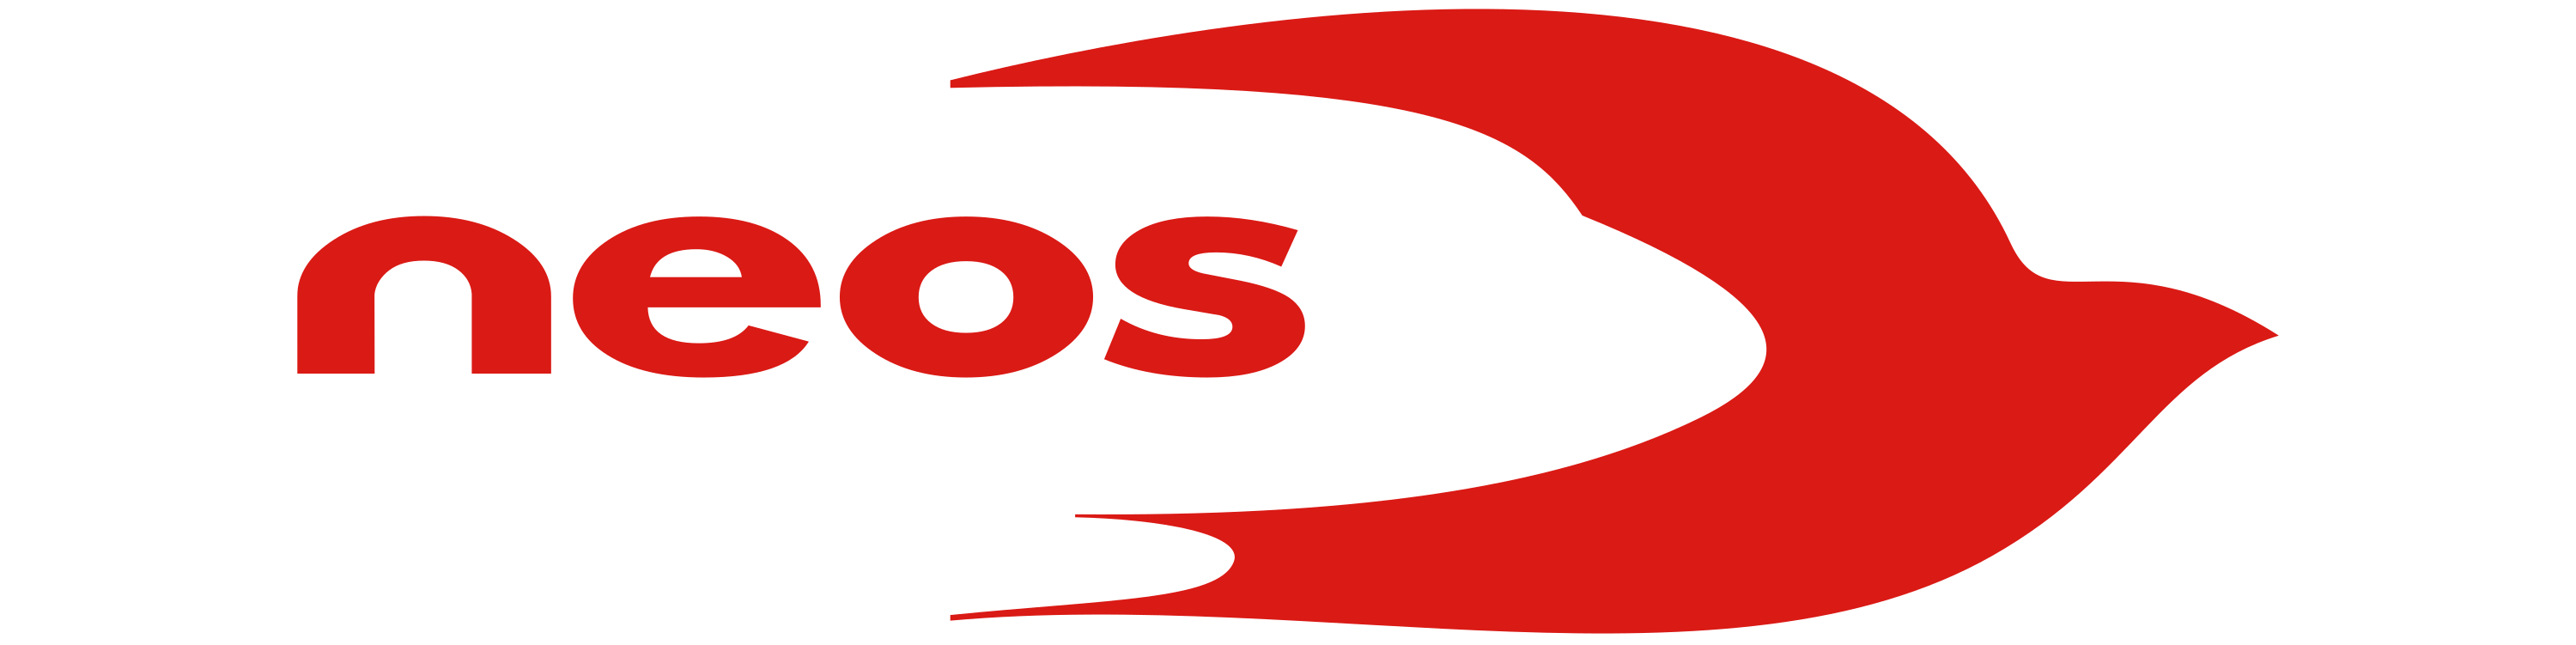 cropped cropped Neos airline Logo.wine 